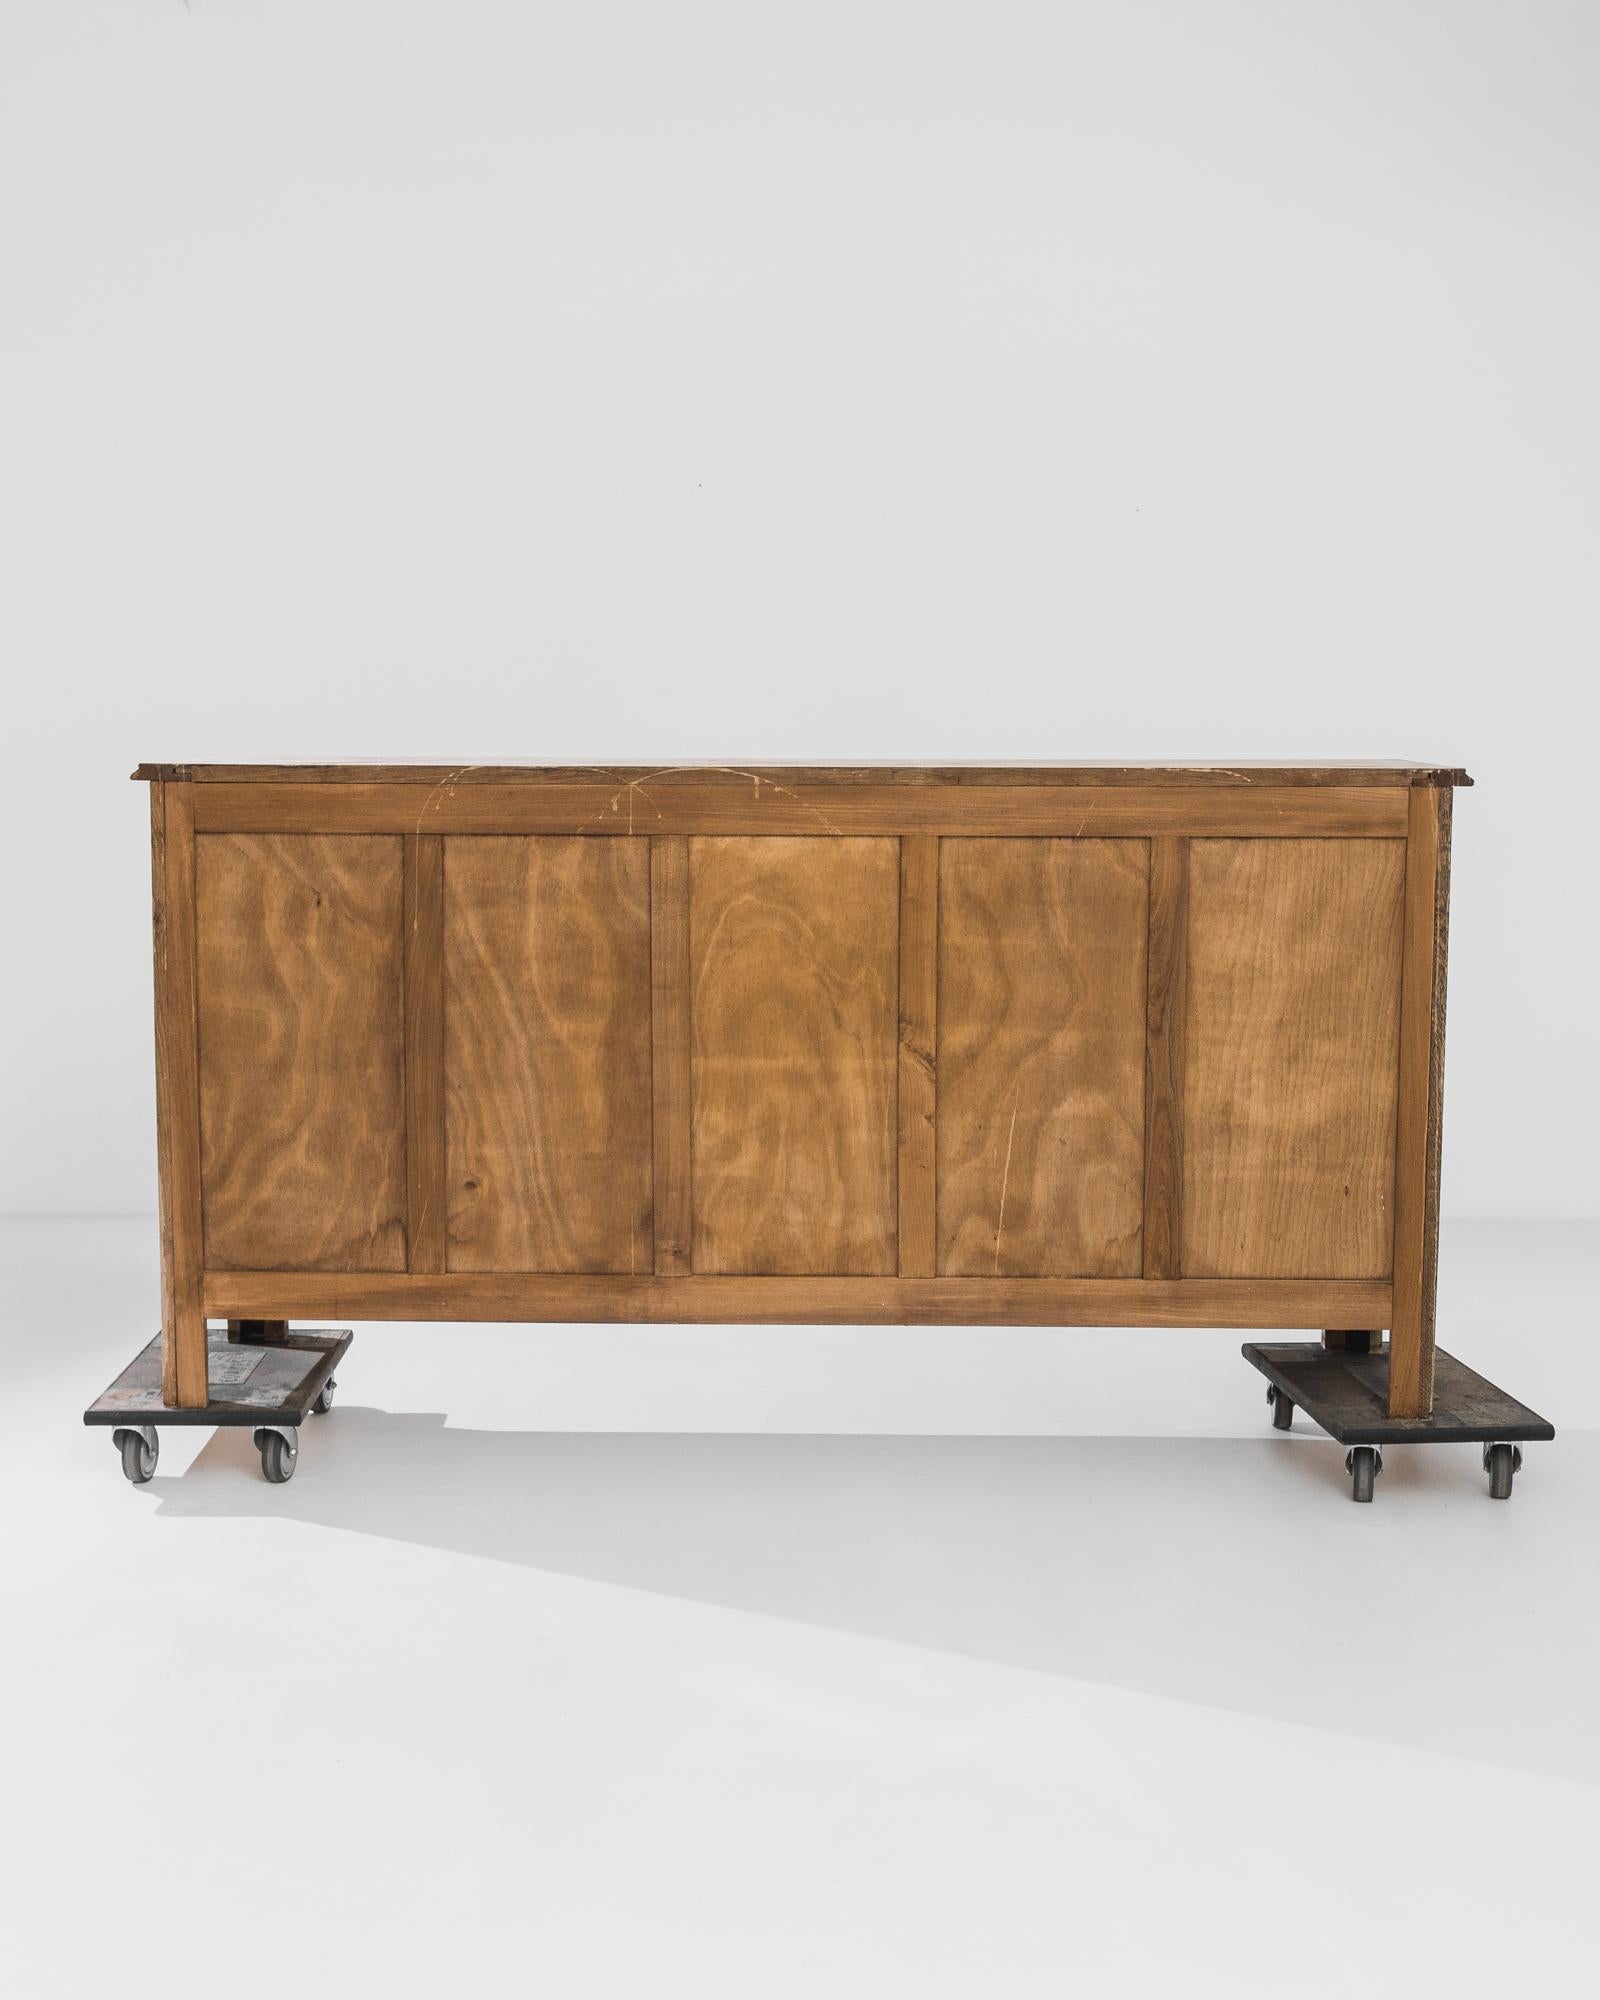 This corpulent oak buffet, crafted in France circa 1970, features four exquisitely carved doors and two complimentary drawers. The hypnotizing relief carvings on the doors bring about a three-dimensional feel. The ornate iron hardware complements